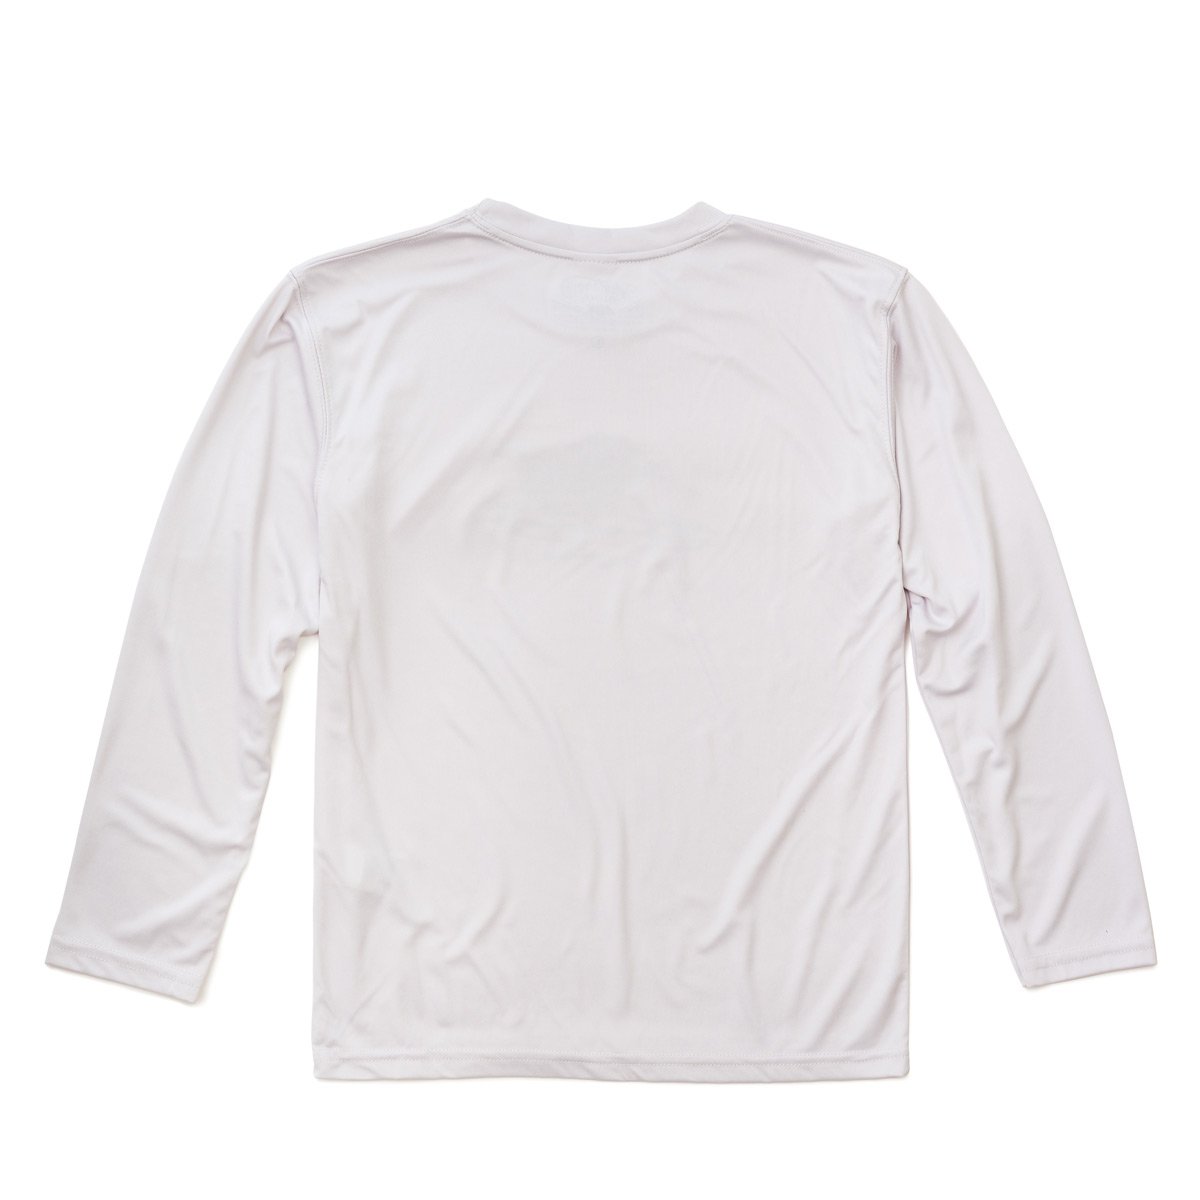 YOUTH SURFING BOAR PERFORMANCE TEE - PEARL GRAY